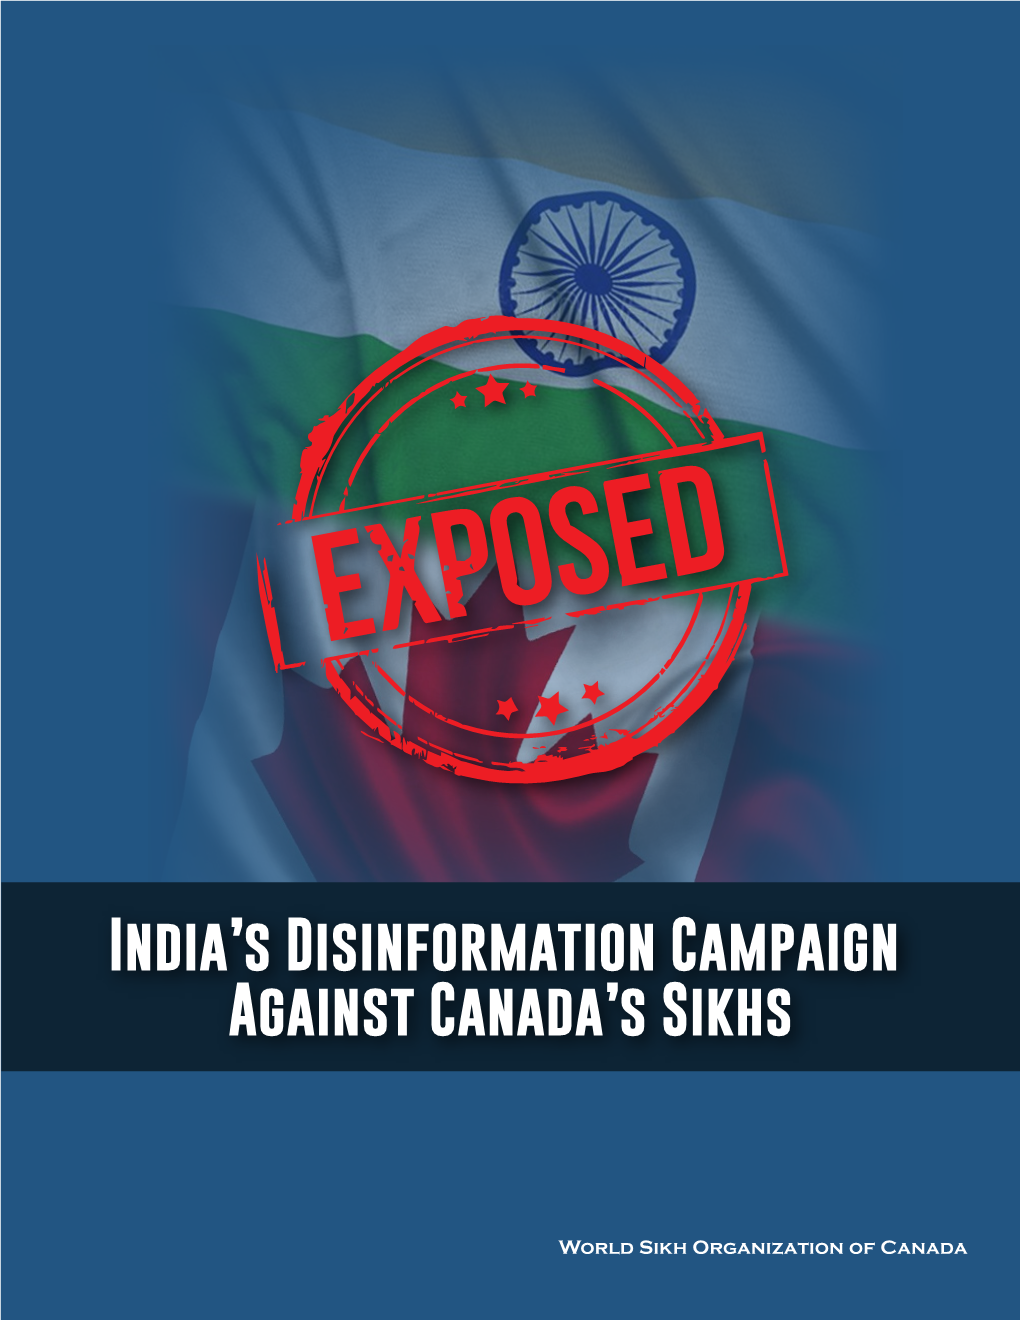 India's Disinformation Campaign Against Canada's Sikhs